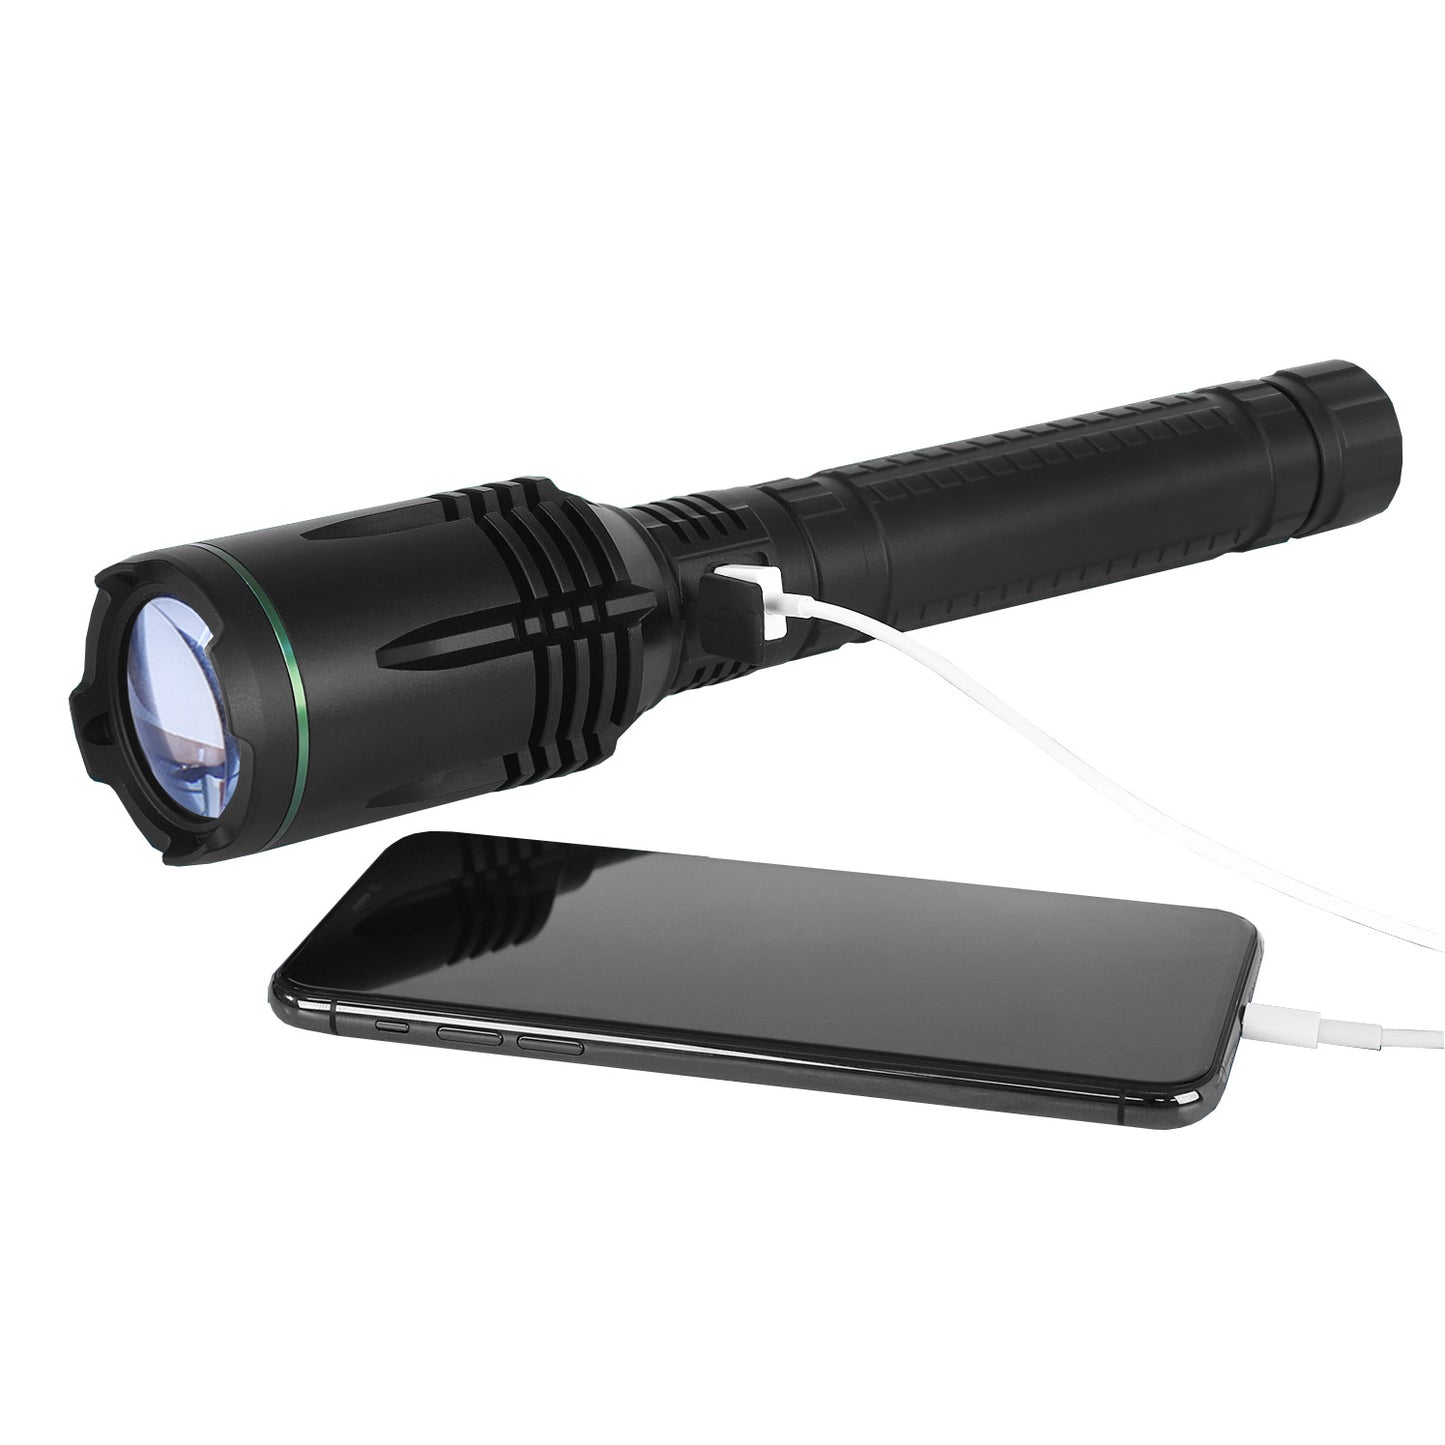 High-Intensity LED Flashlight with 3,000 Lumens, Includes Rechargeable Batteries and Additional 3 "C" Batteries